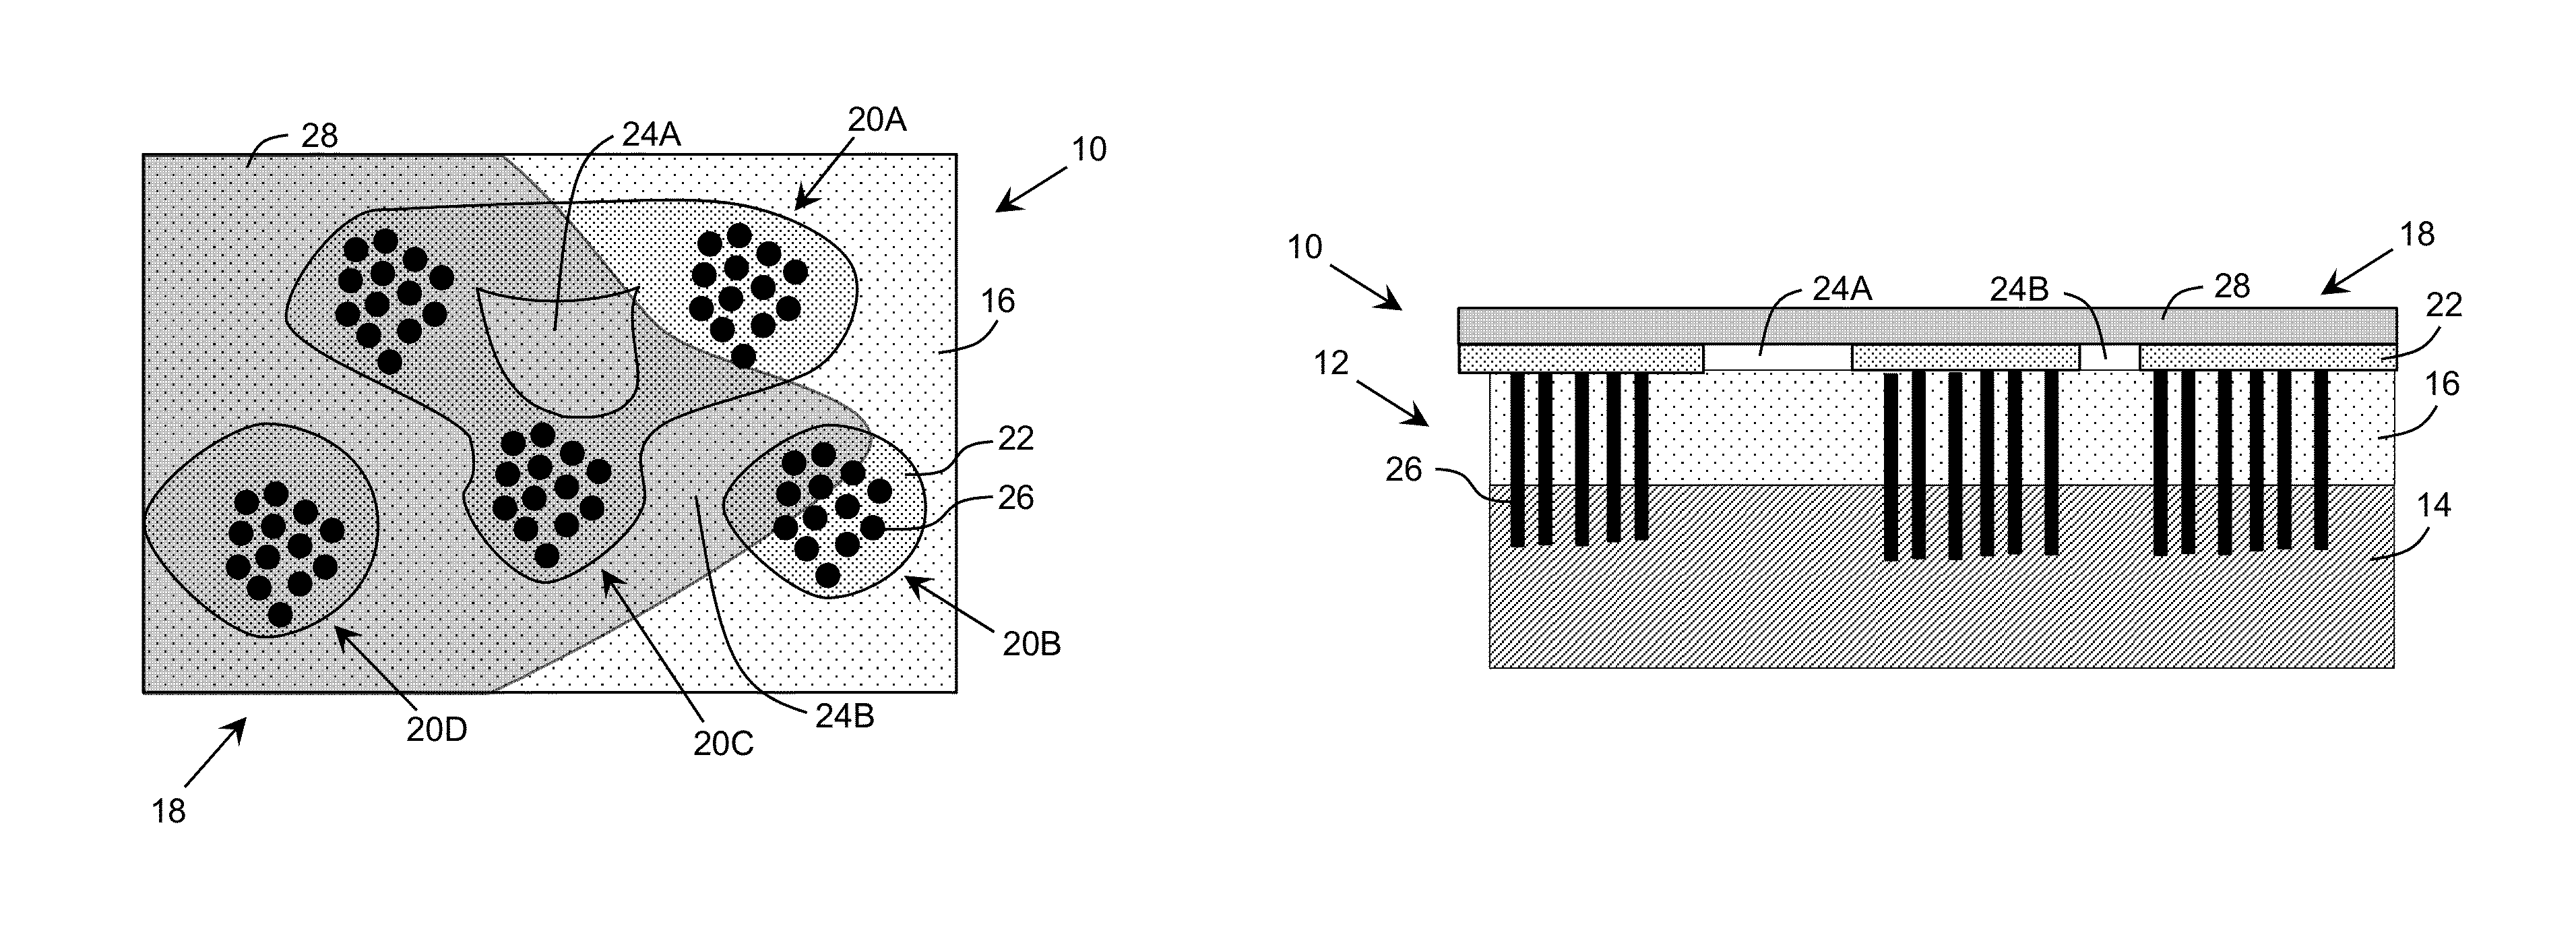 Metallic contact for optoelectronic semiconductor device